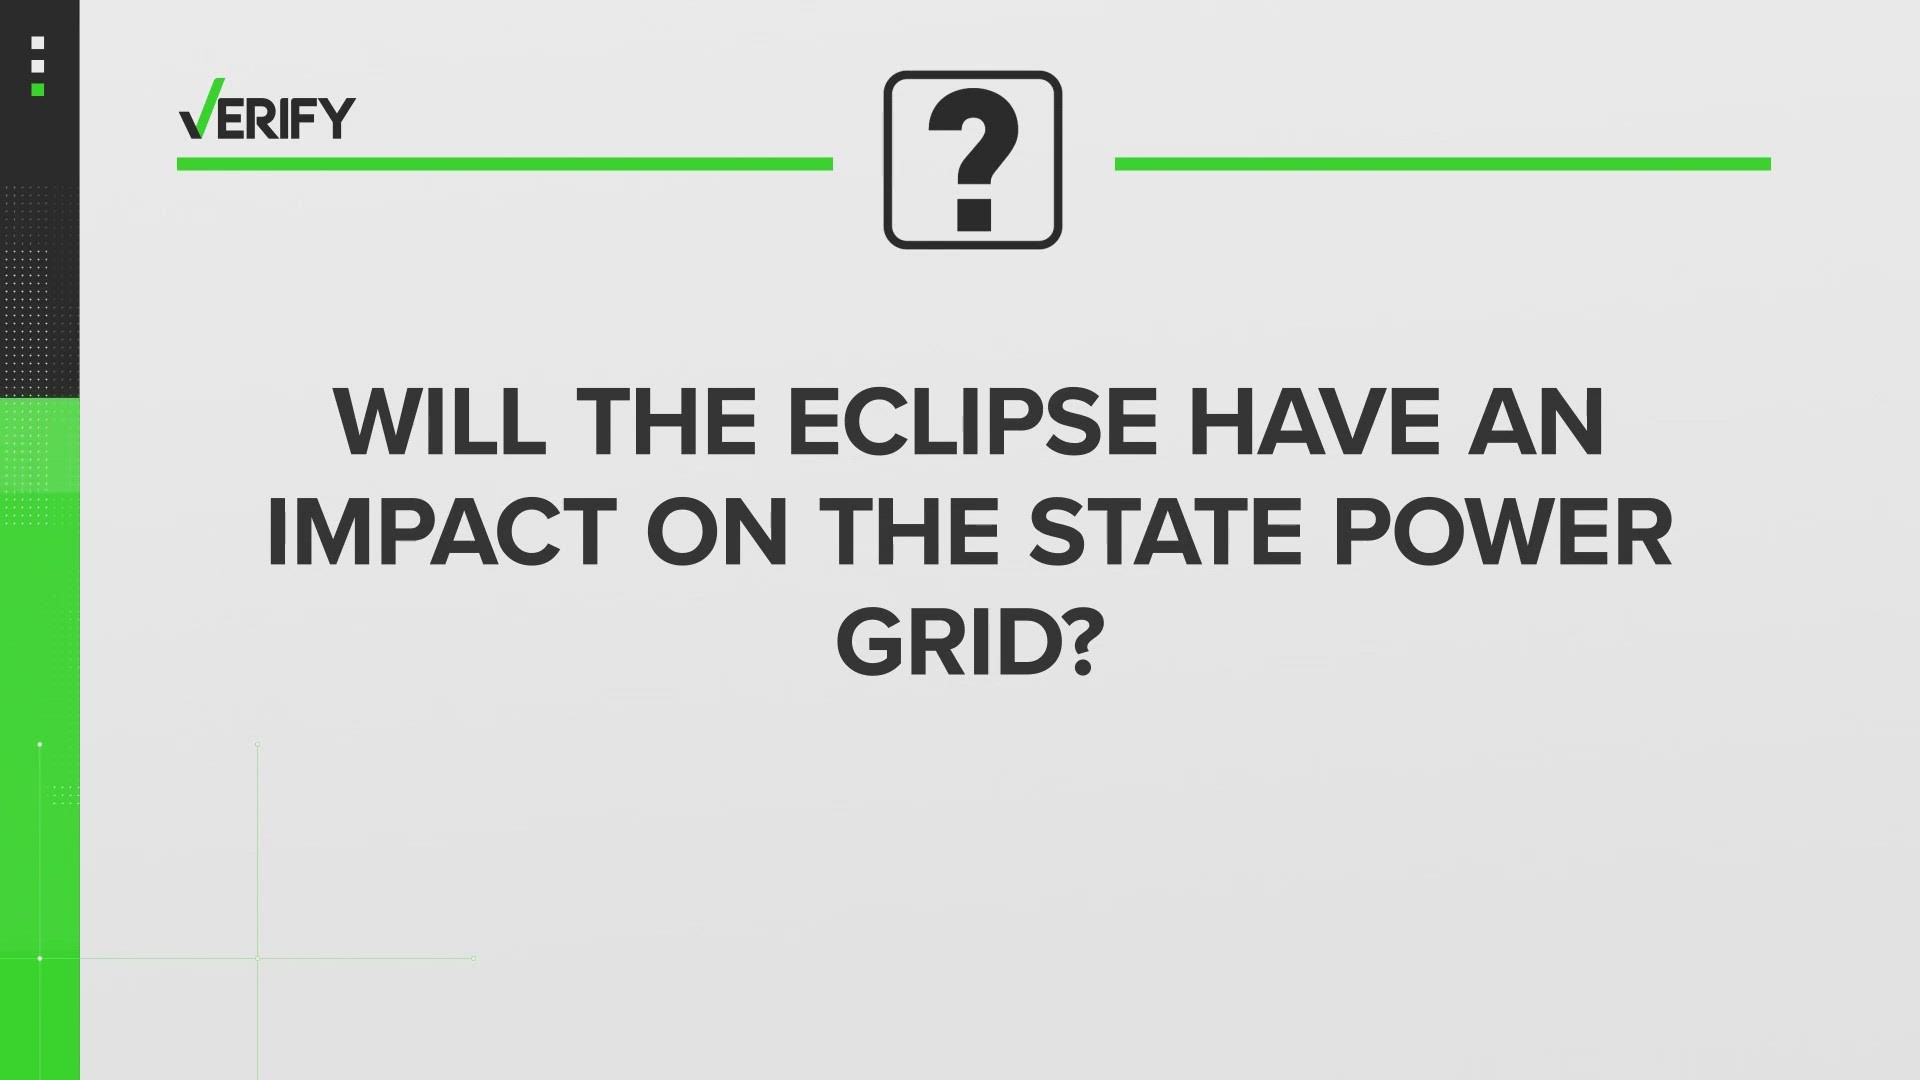 Managers of the Texas power grid, ERCOT, have an 11-day plan to get the state ready for the eclipse on April 8.